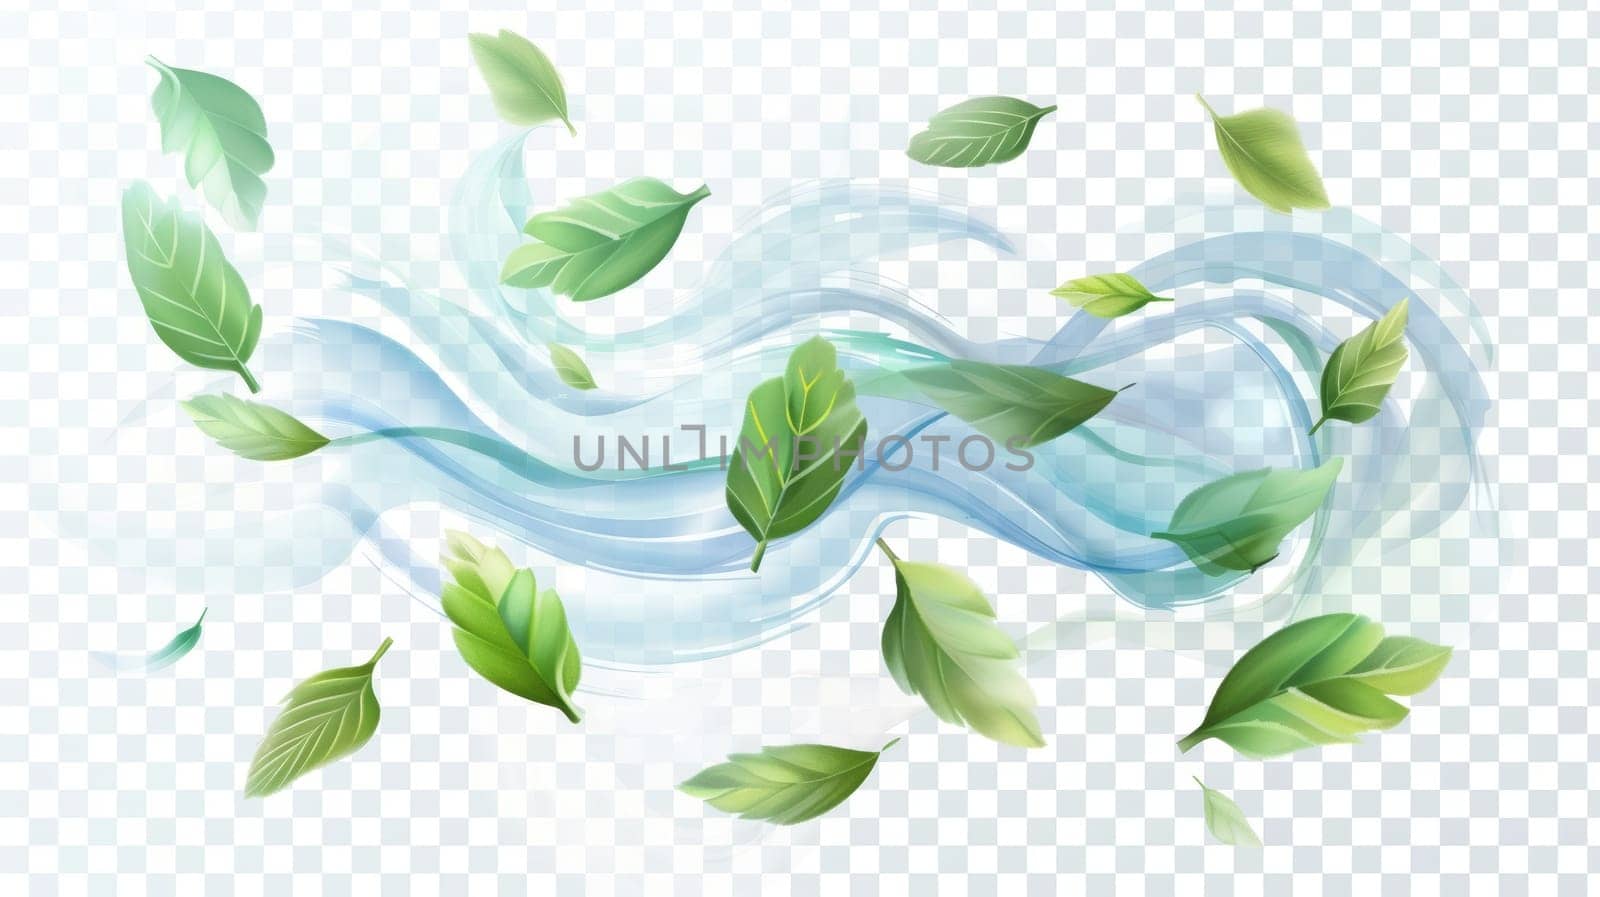 Flowing blue wind, air swirls, and waves with flying green leaves. Isolated fresh wind motion with mint leaves, modern illustration.